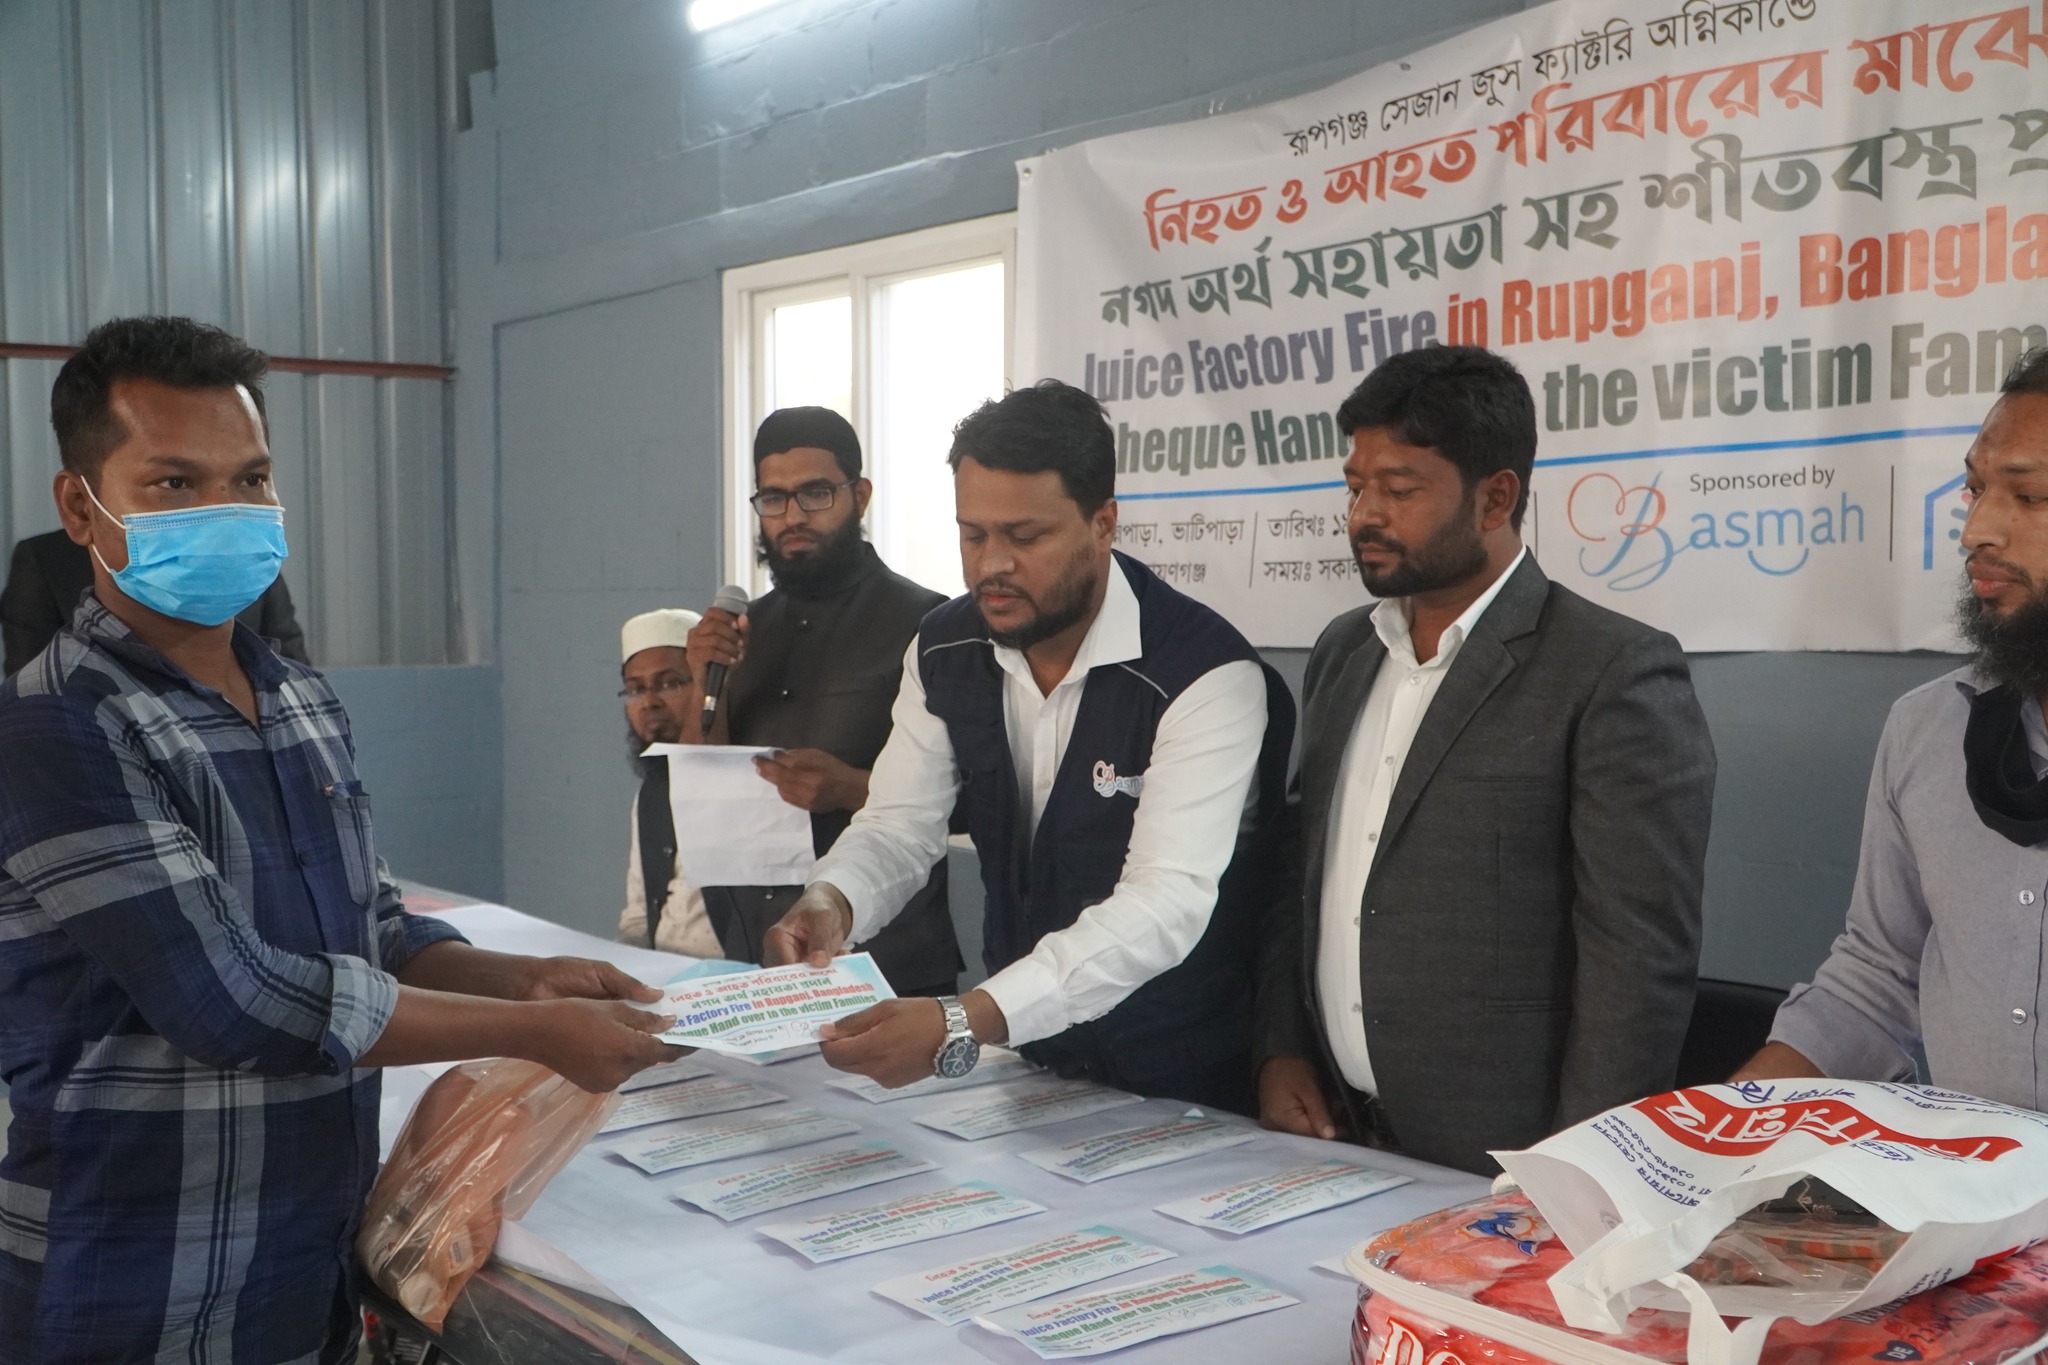 Relief Distribution Program for Helpless Family of Rupganj Tragedy